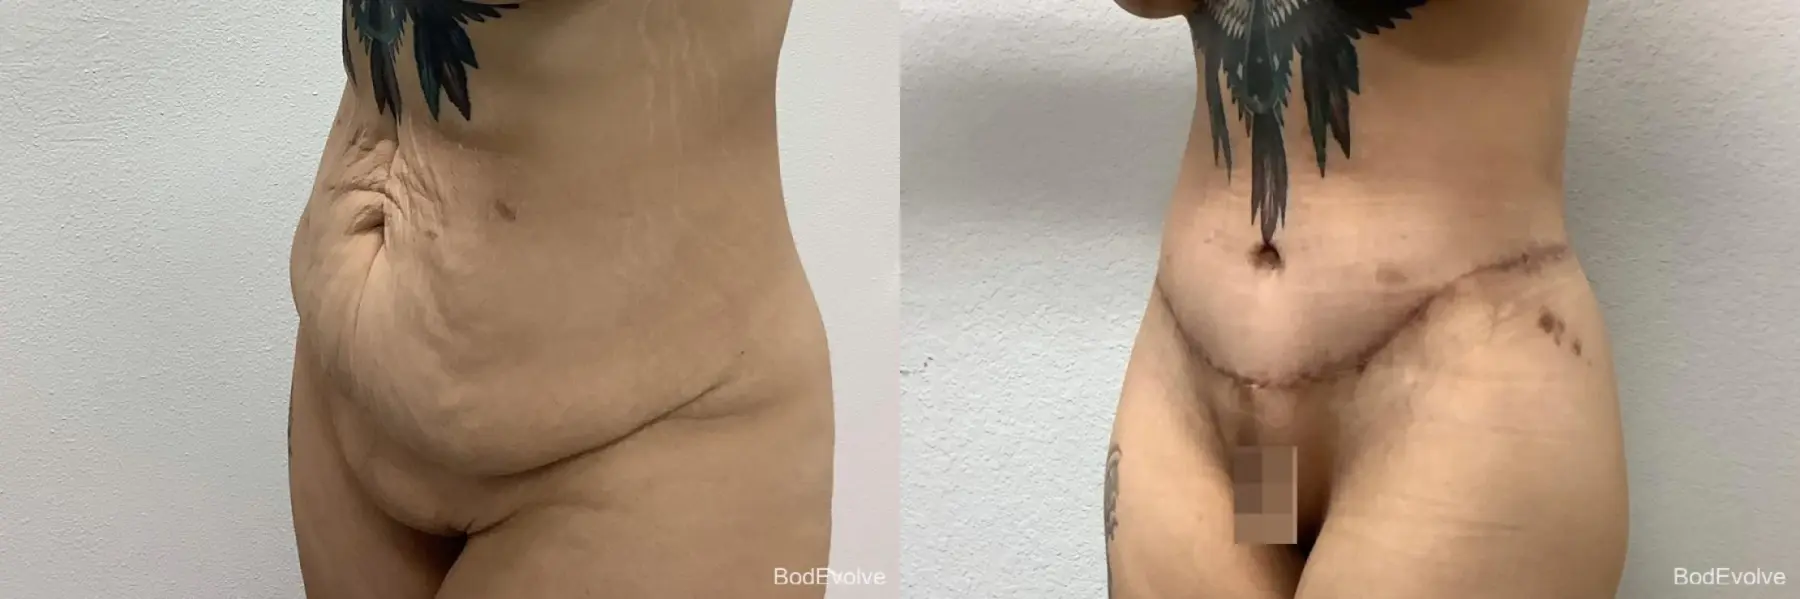 Body Lift: Patient 3 - Before and After 2